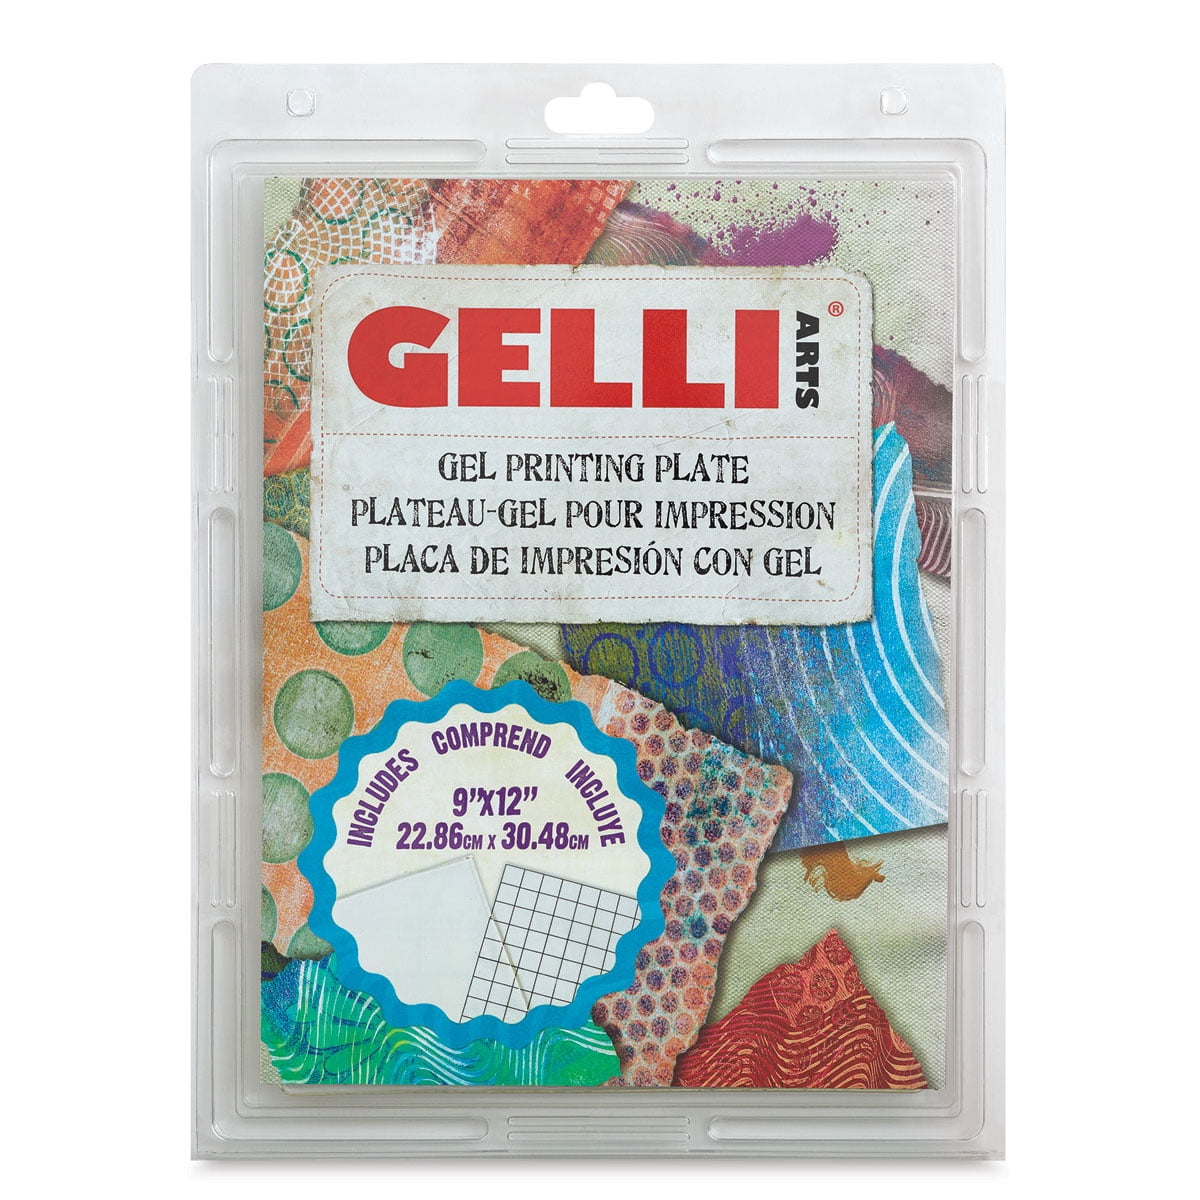 Deli Waxed Paper 25-50 sheets Premium Heavyweight for Mixed Media, Gelli  Plate Printing Art Journaling